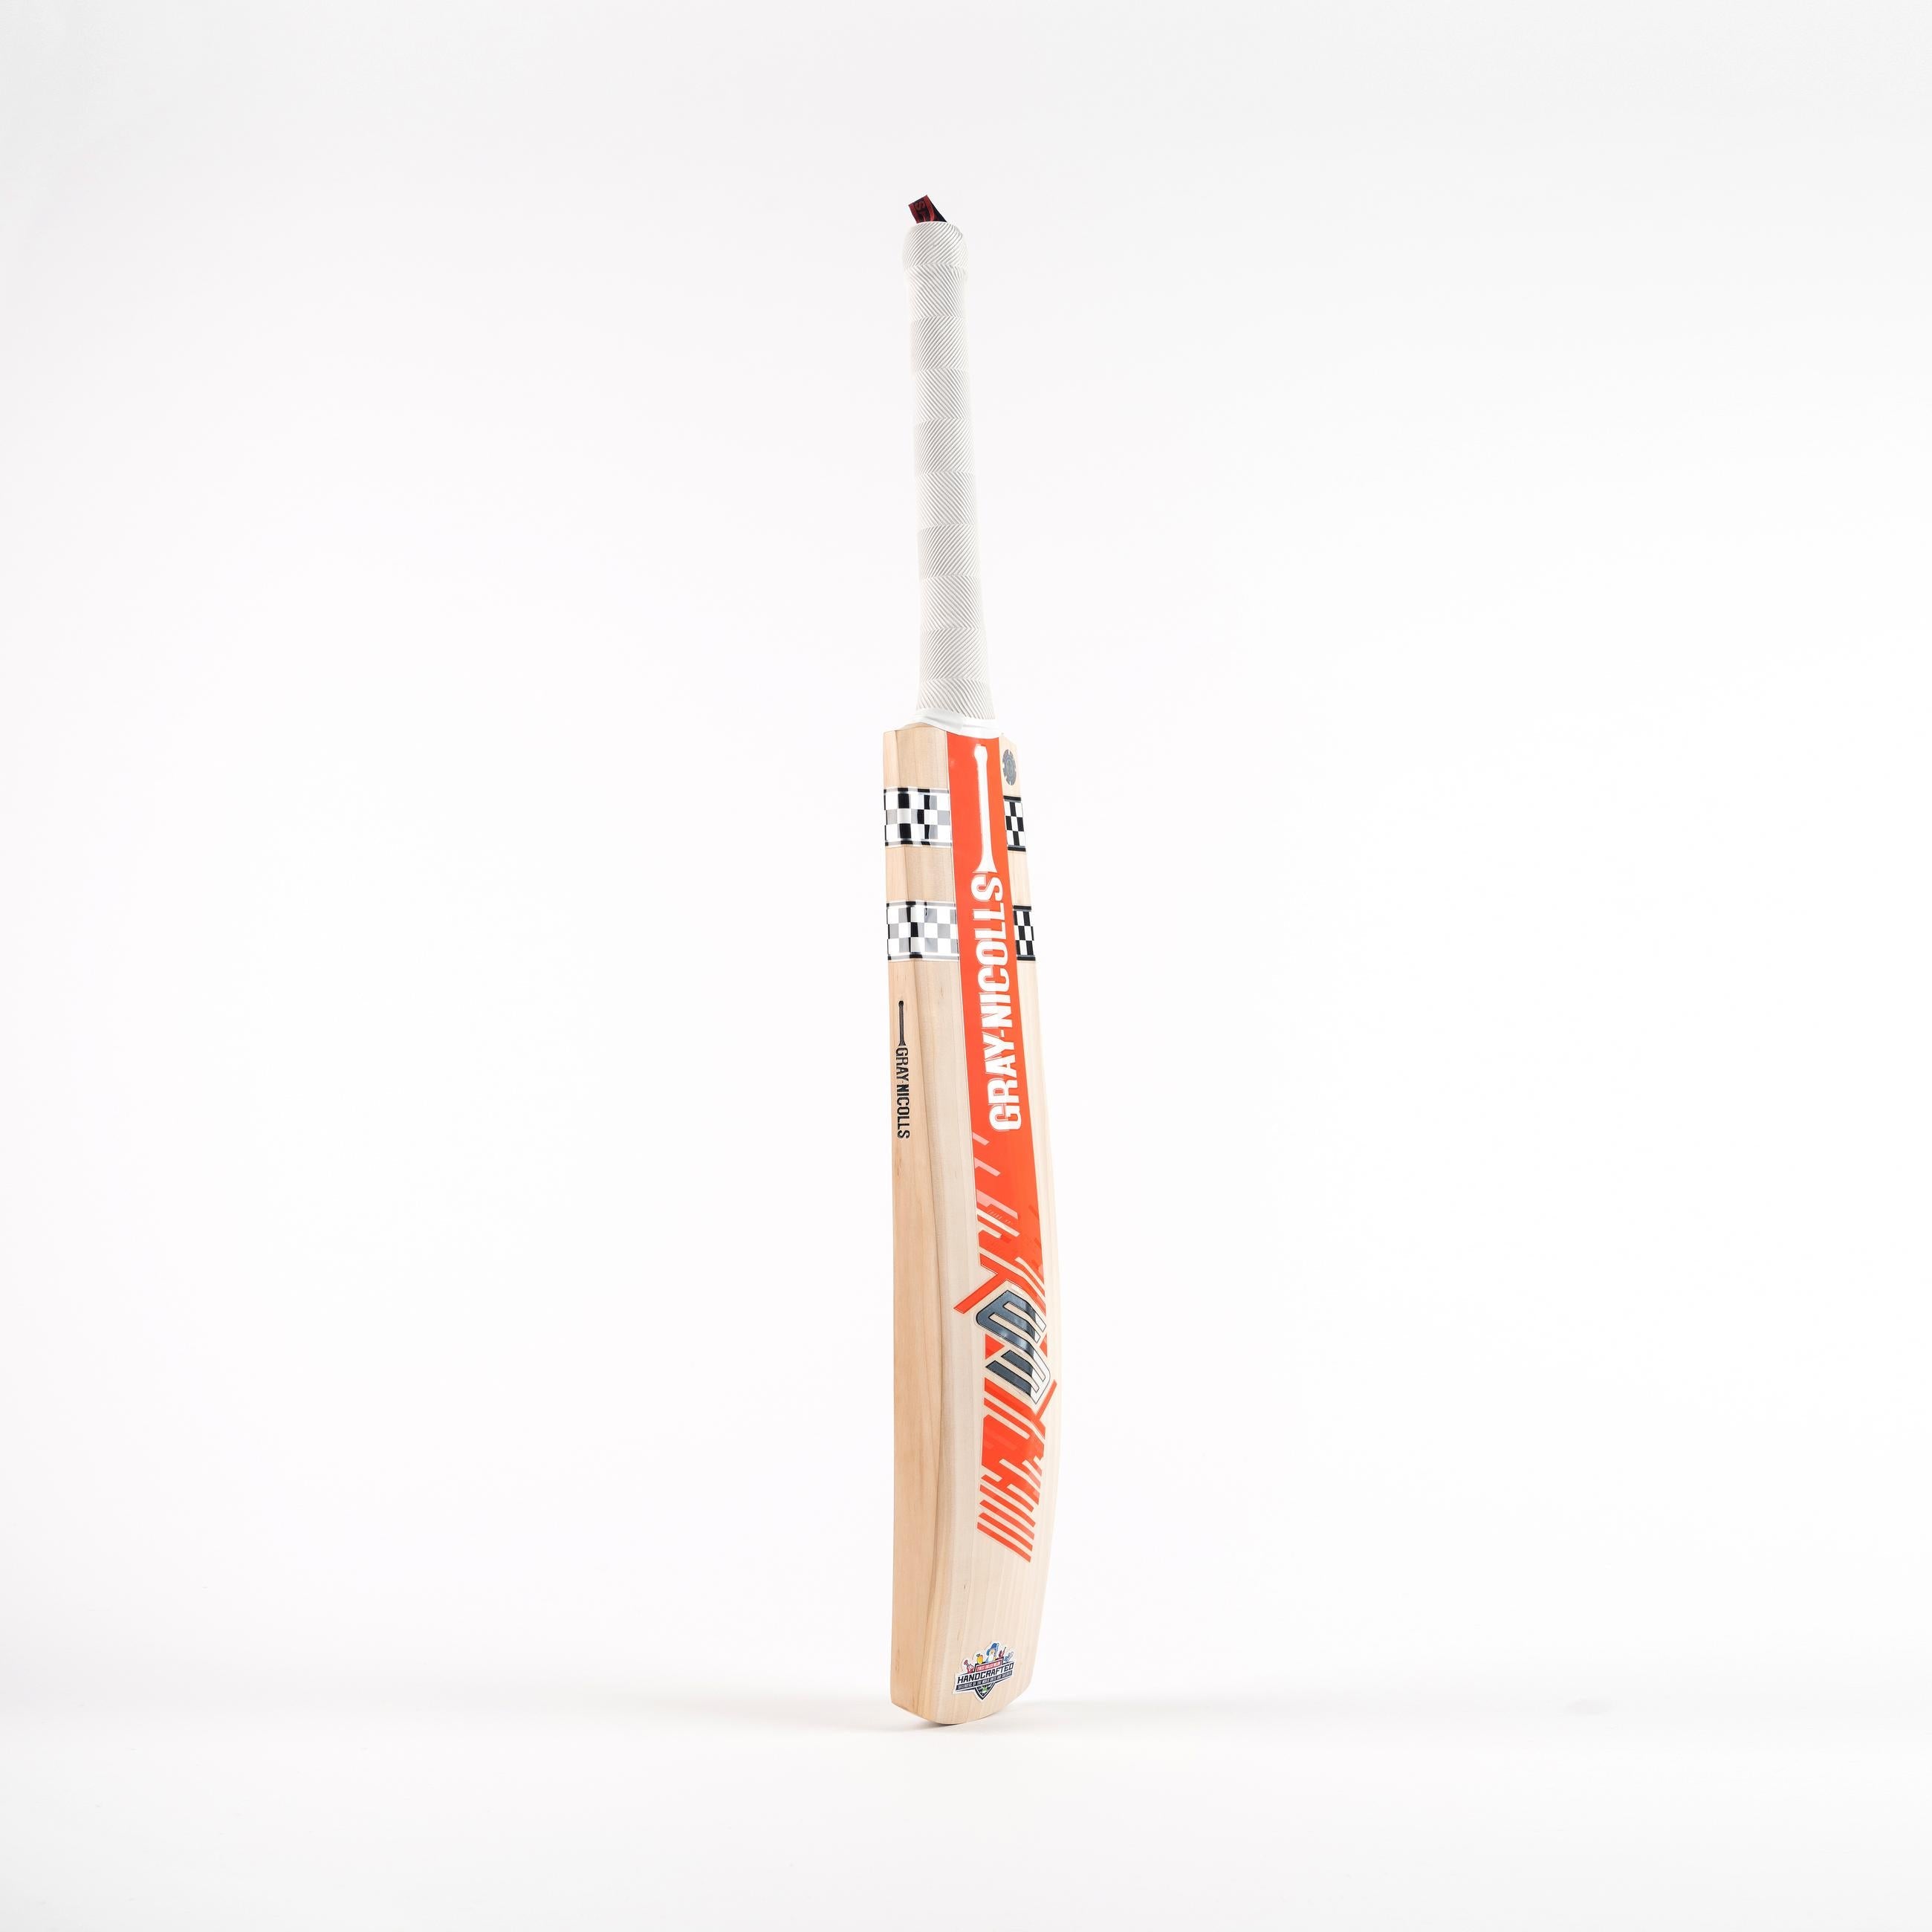 Tailender 3 Players Edition Adult Cricket Bat